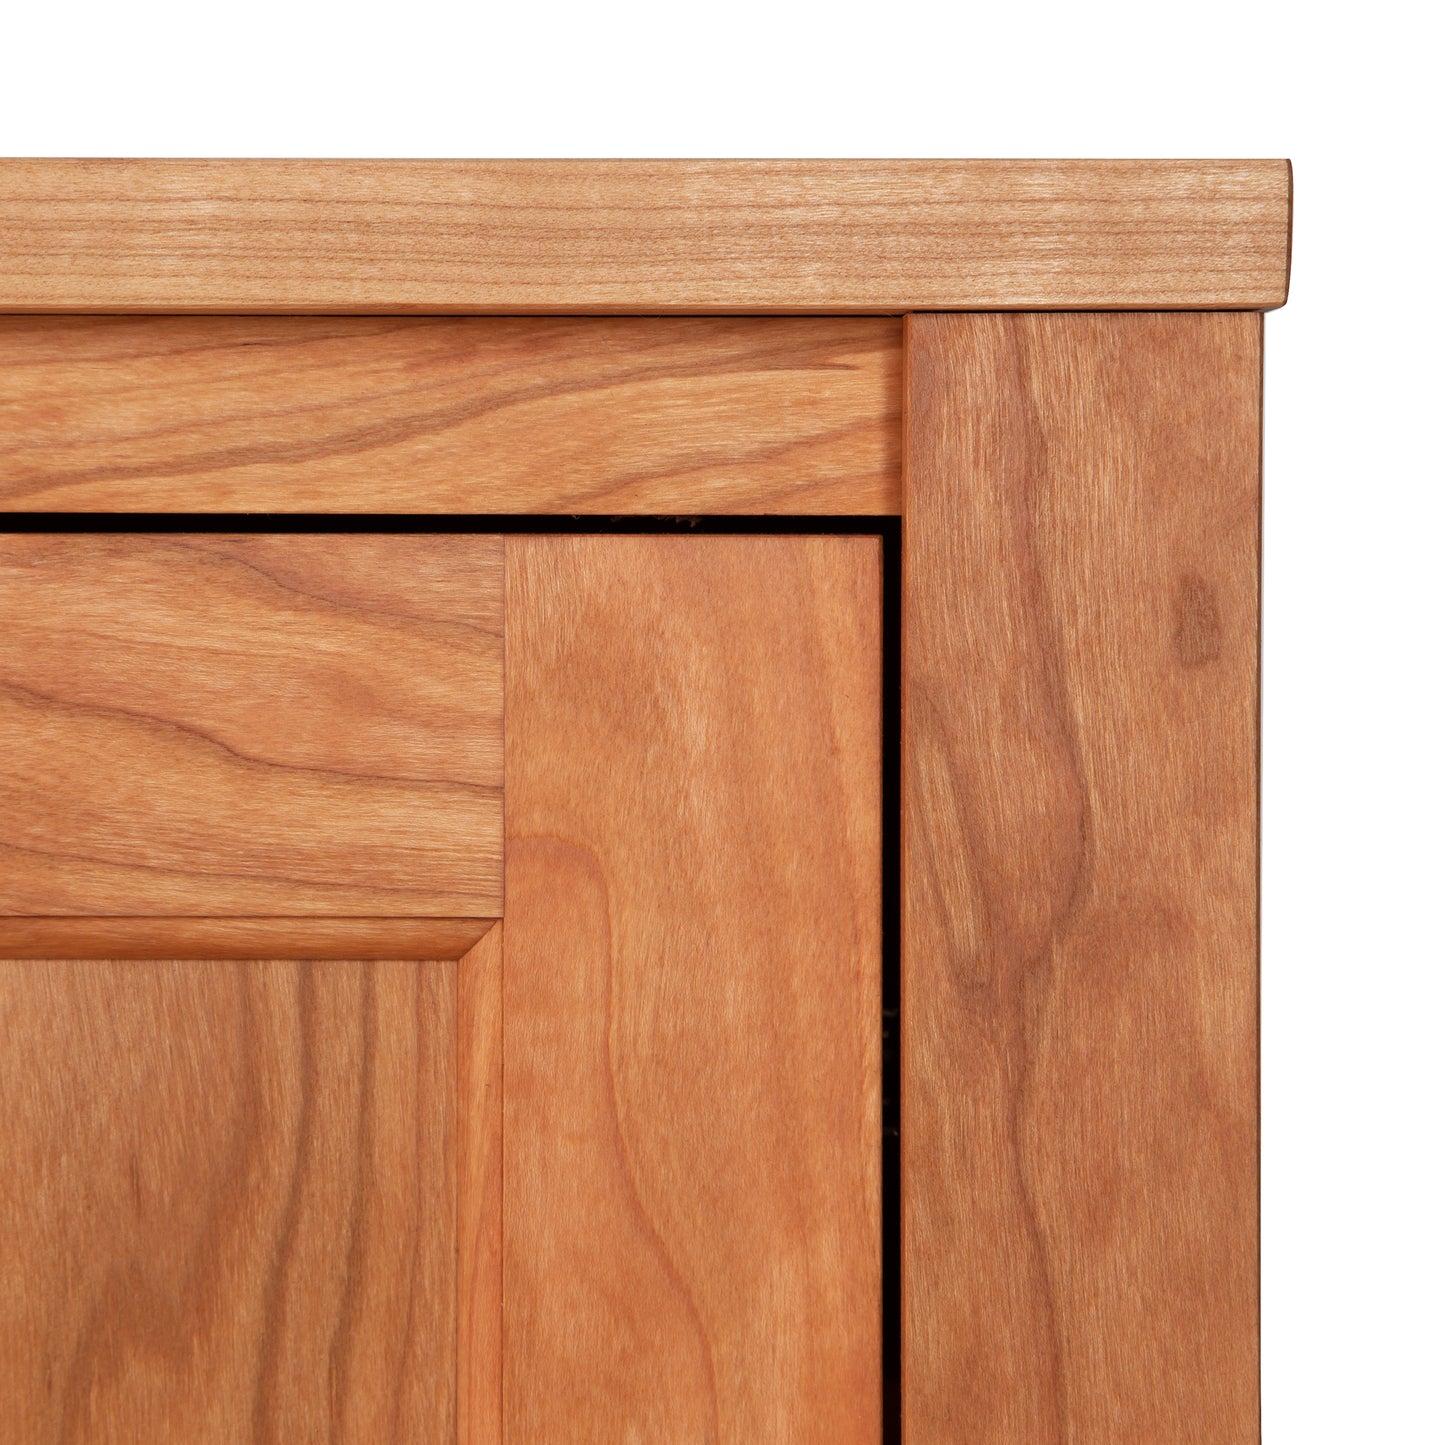 A close up view of the Andover Modern 64" TV Stand designed by Maple Corner Woodworks.